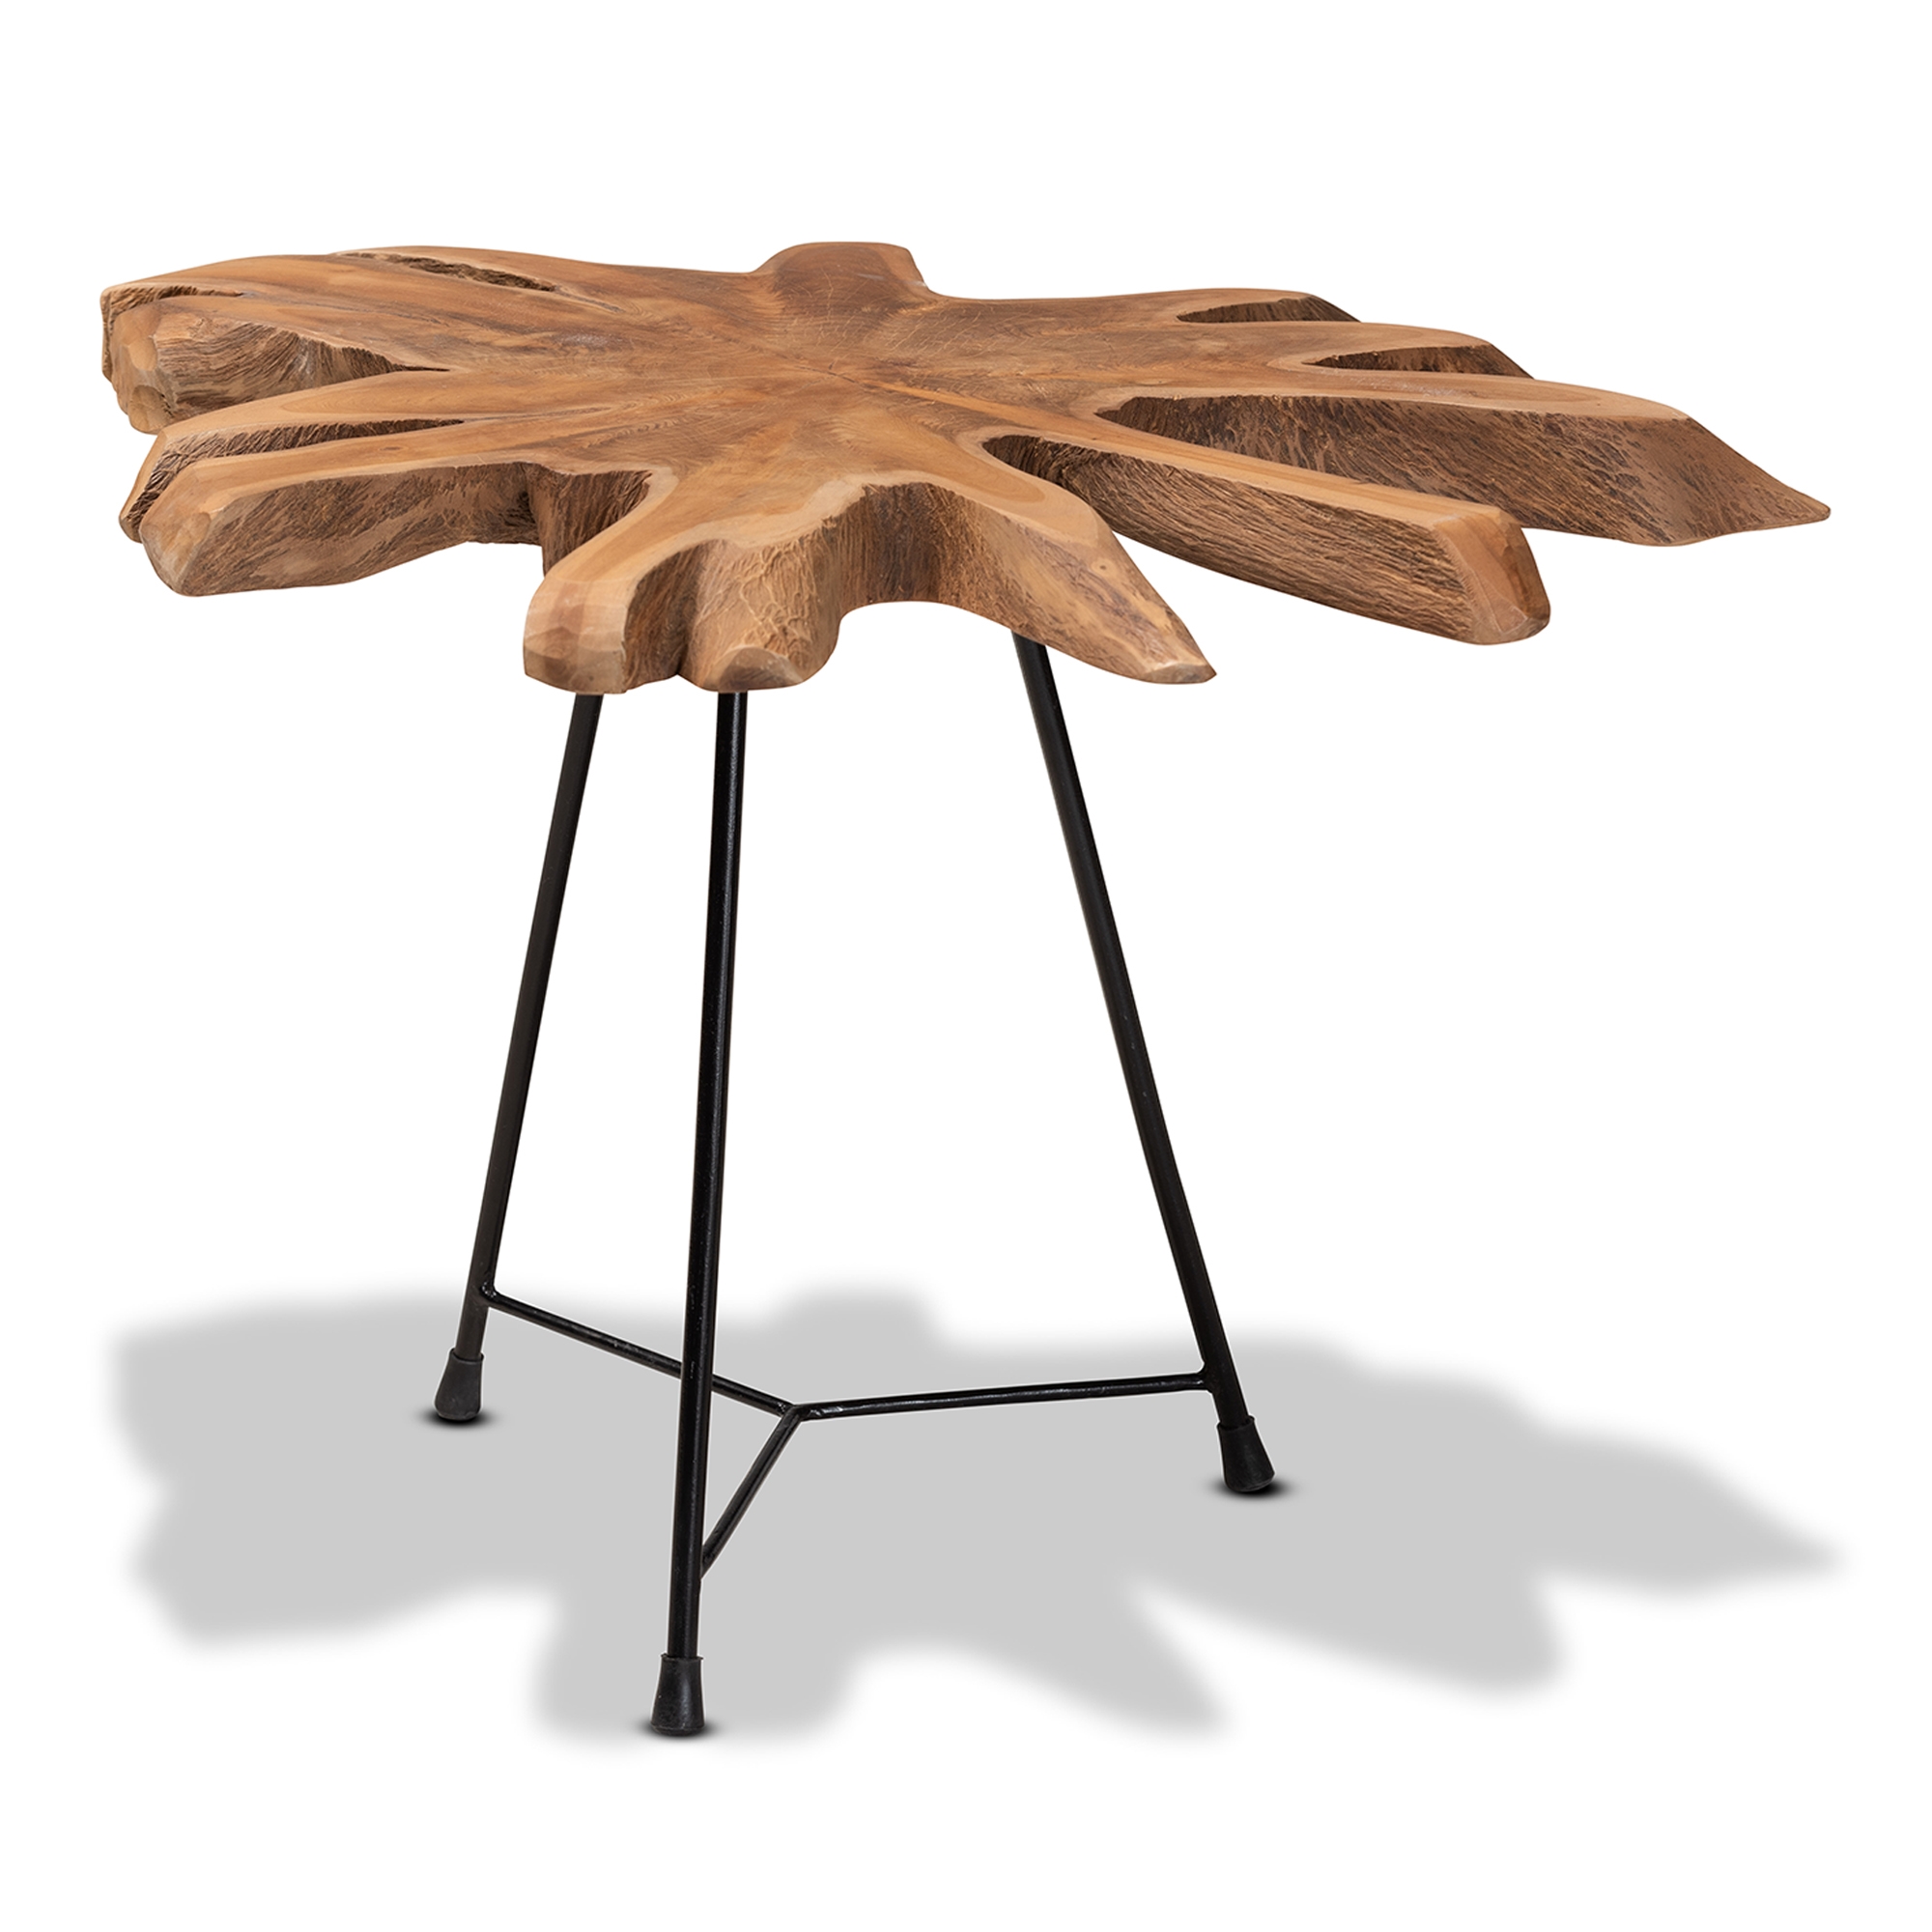 Baxton Studio Merci Rustic Industrial Natural Brown and Black End Table with Teak Tree Trunk Tabletop